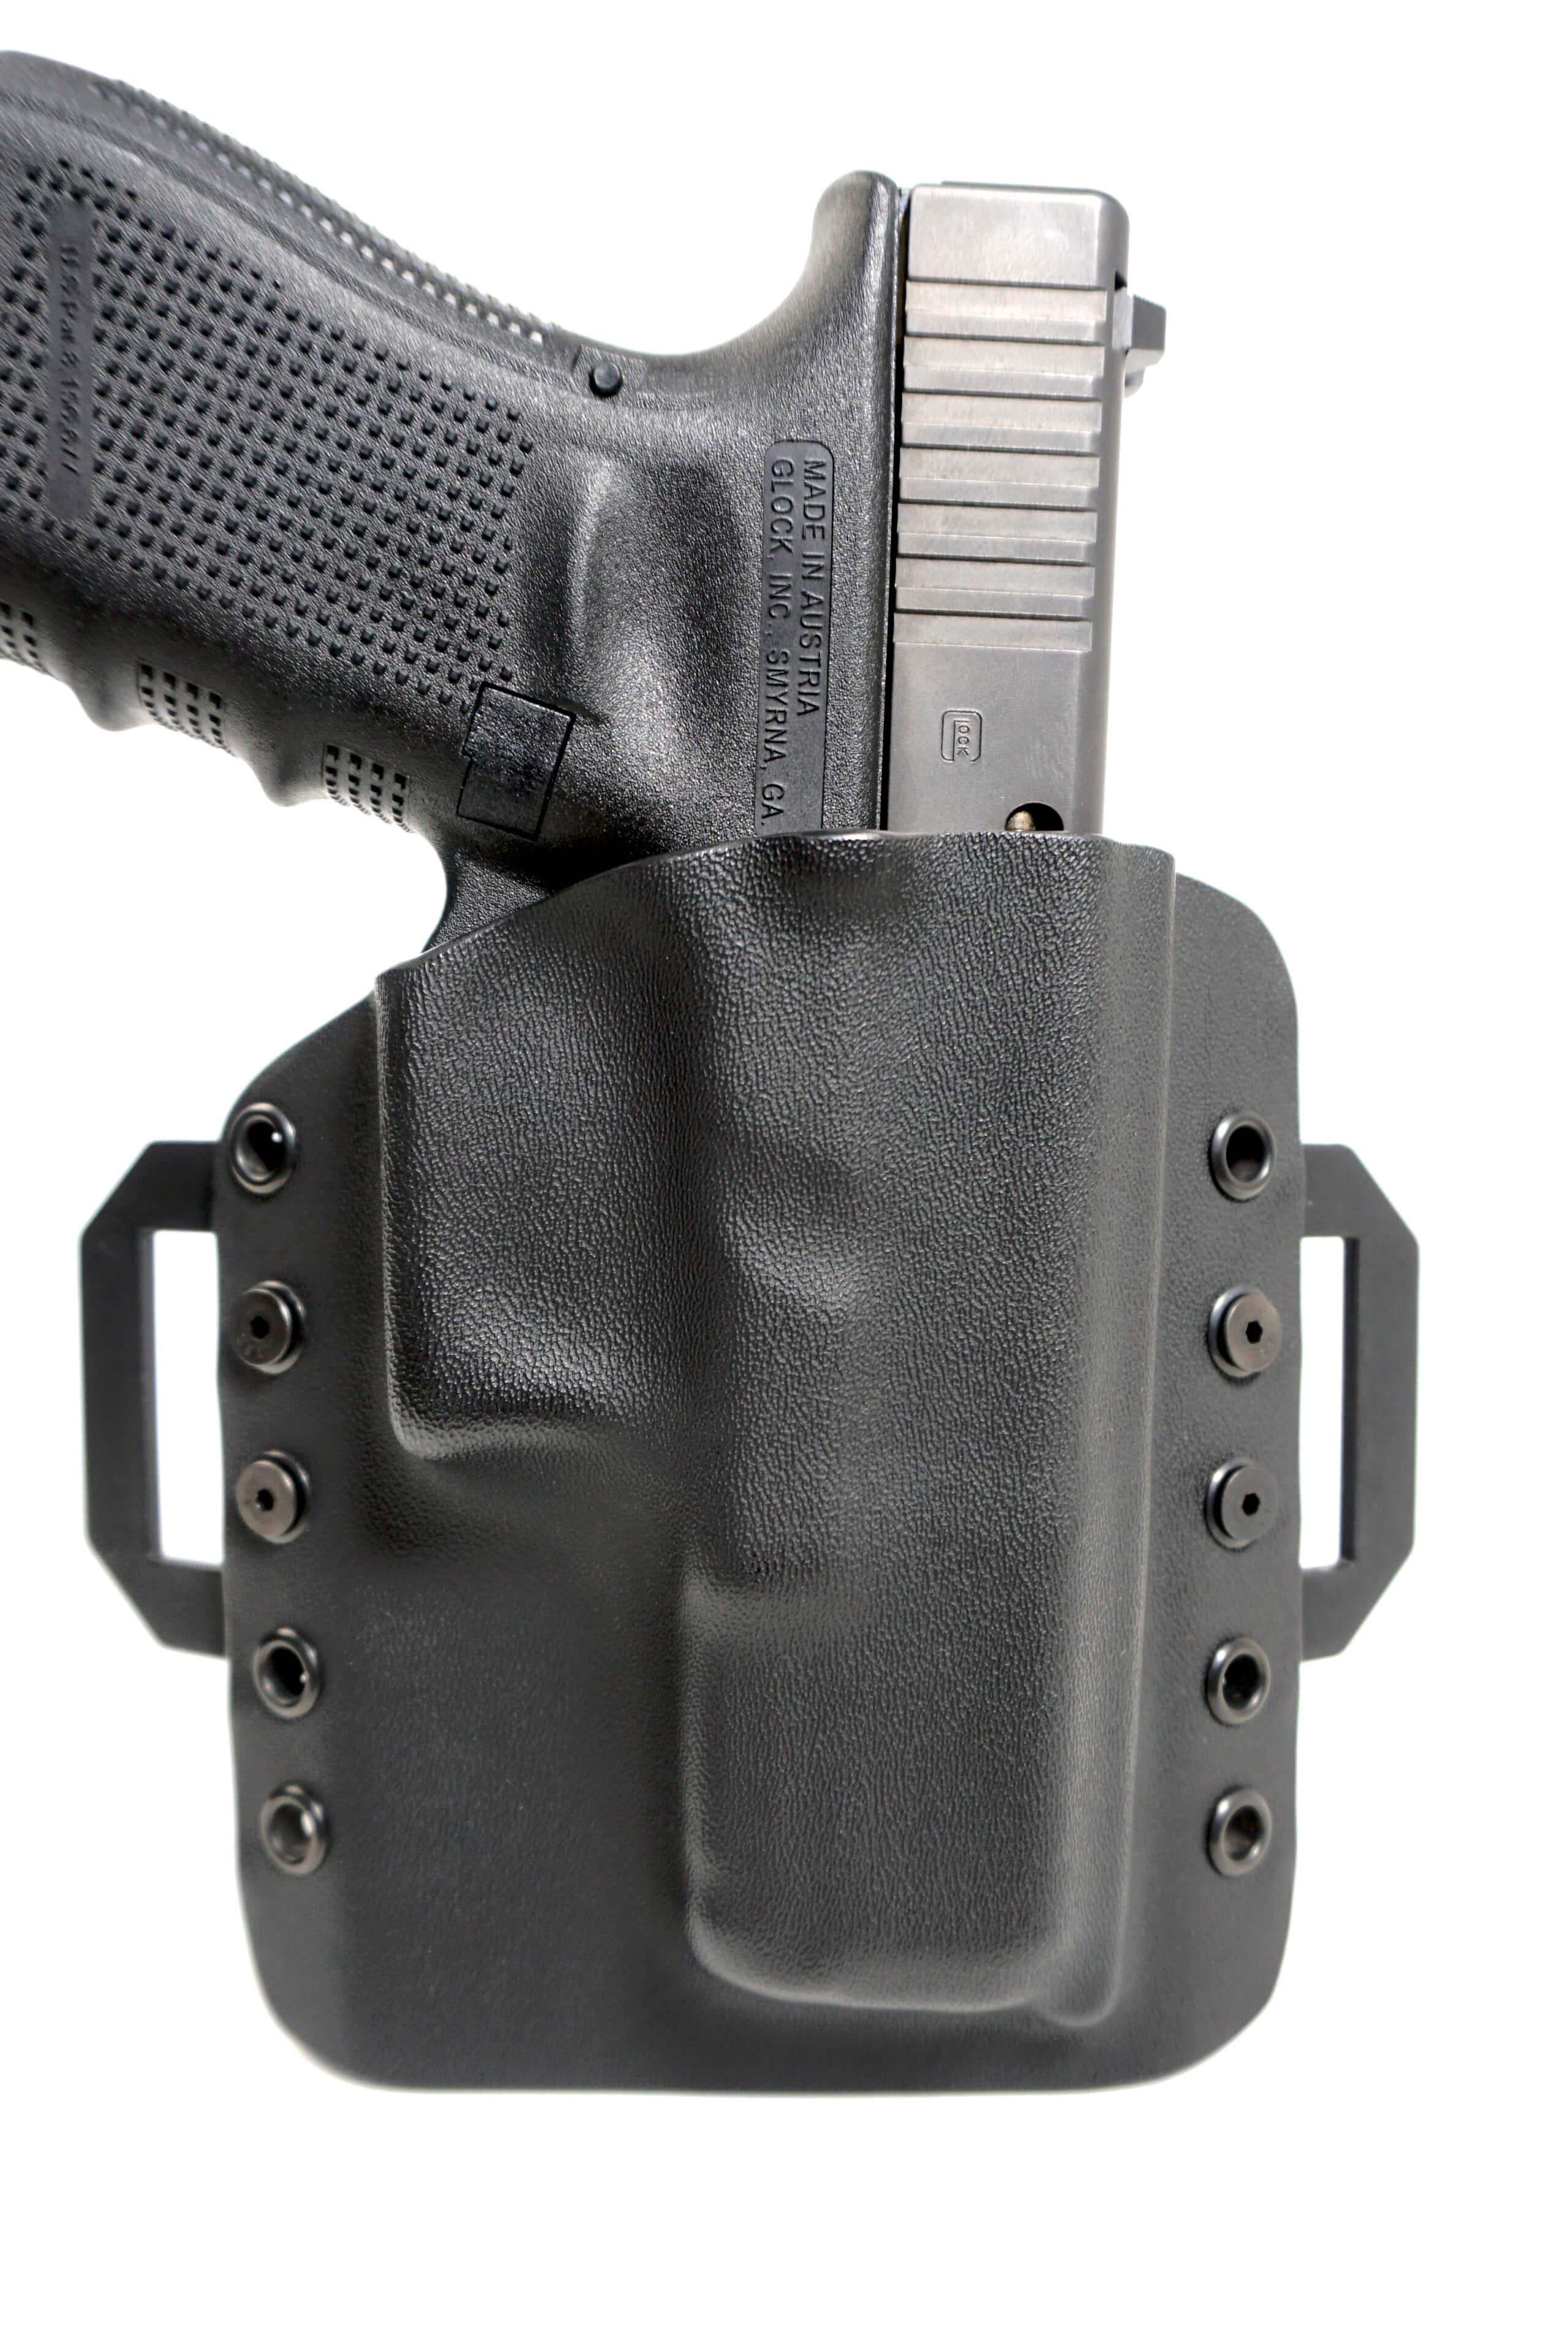 Details about   Leather Kydex Paddle Gun Holster LH RH For HK P2000 